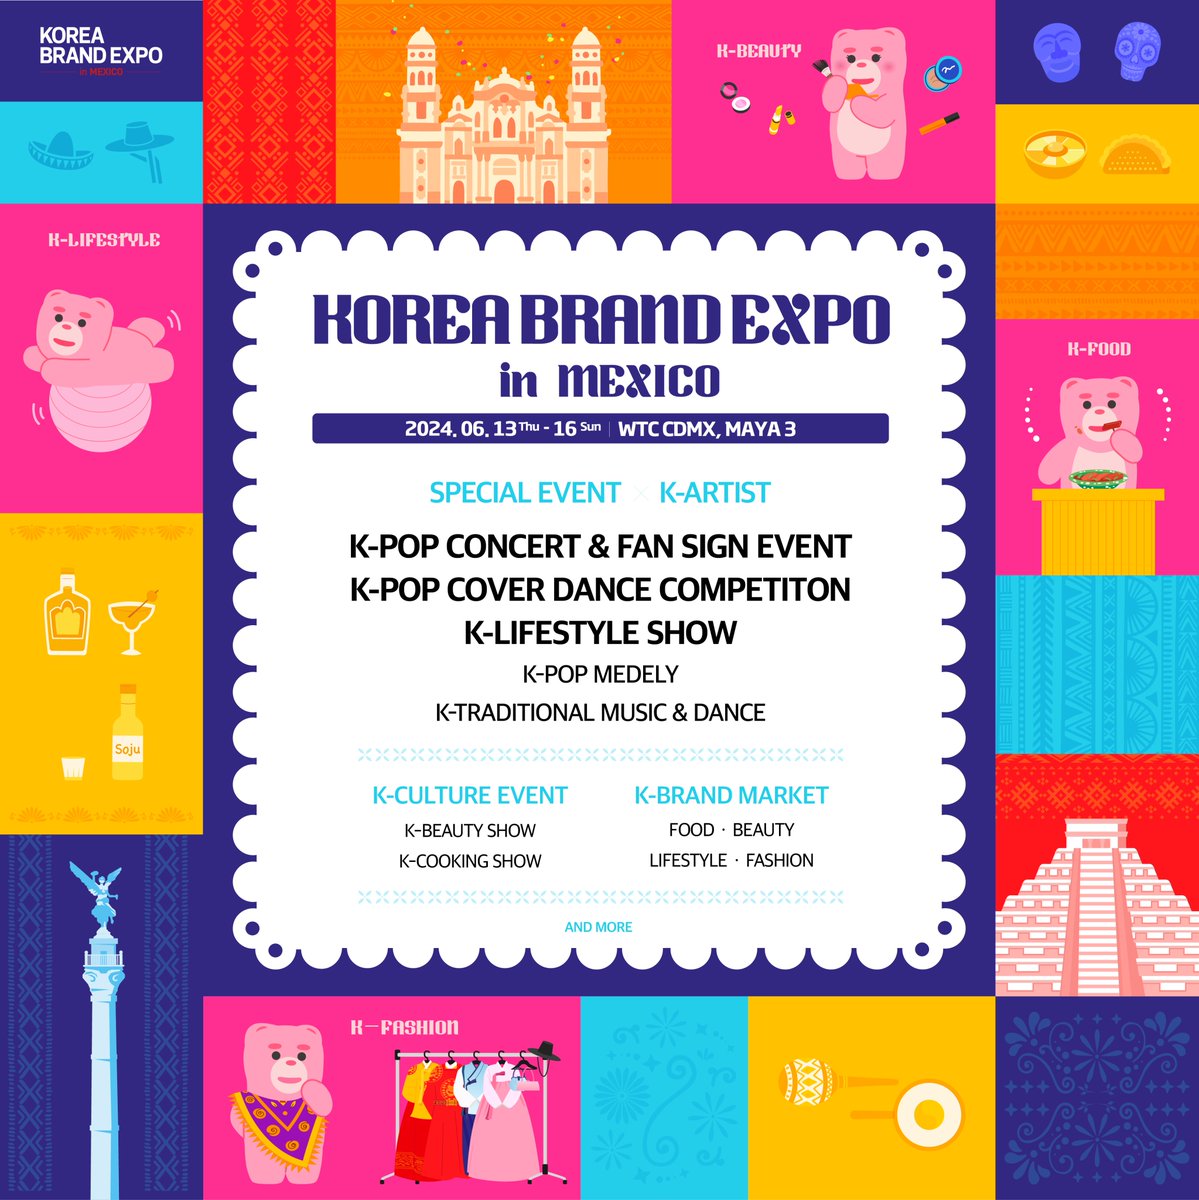 KOREA BRAND EXPO in MEXICO OFFICIAL LINE-UP✨ Revealing the first K-artist you were looking forward! KWON YURI🌸 who is actively working in diverse field from singing to acting!s Don’t miss the chance to experience diversity of K-culture and products with her!